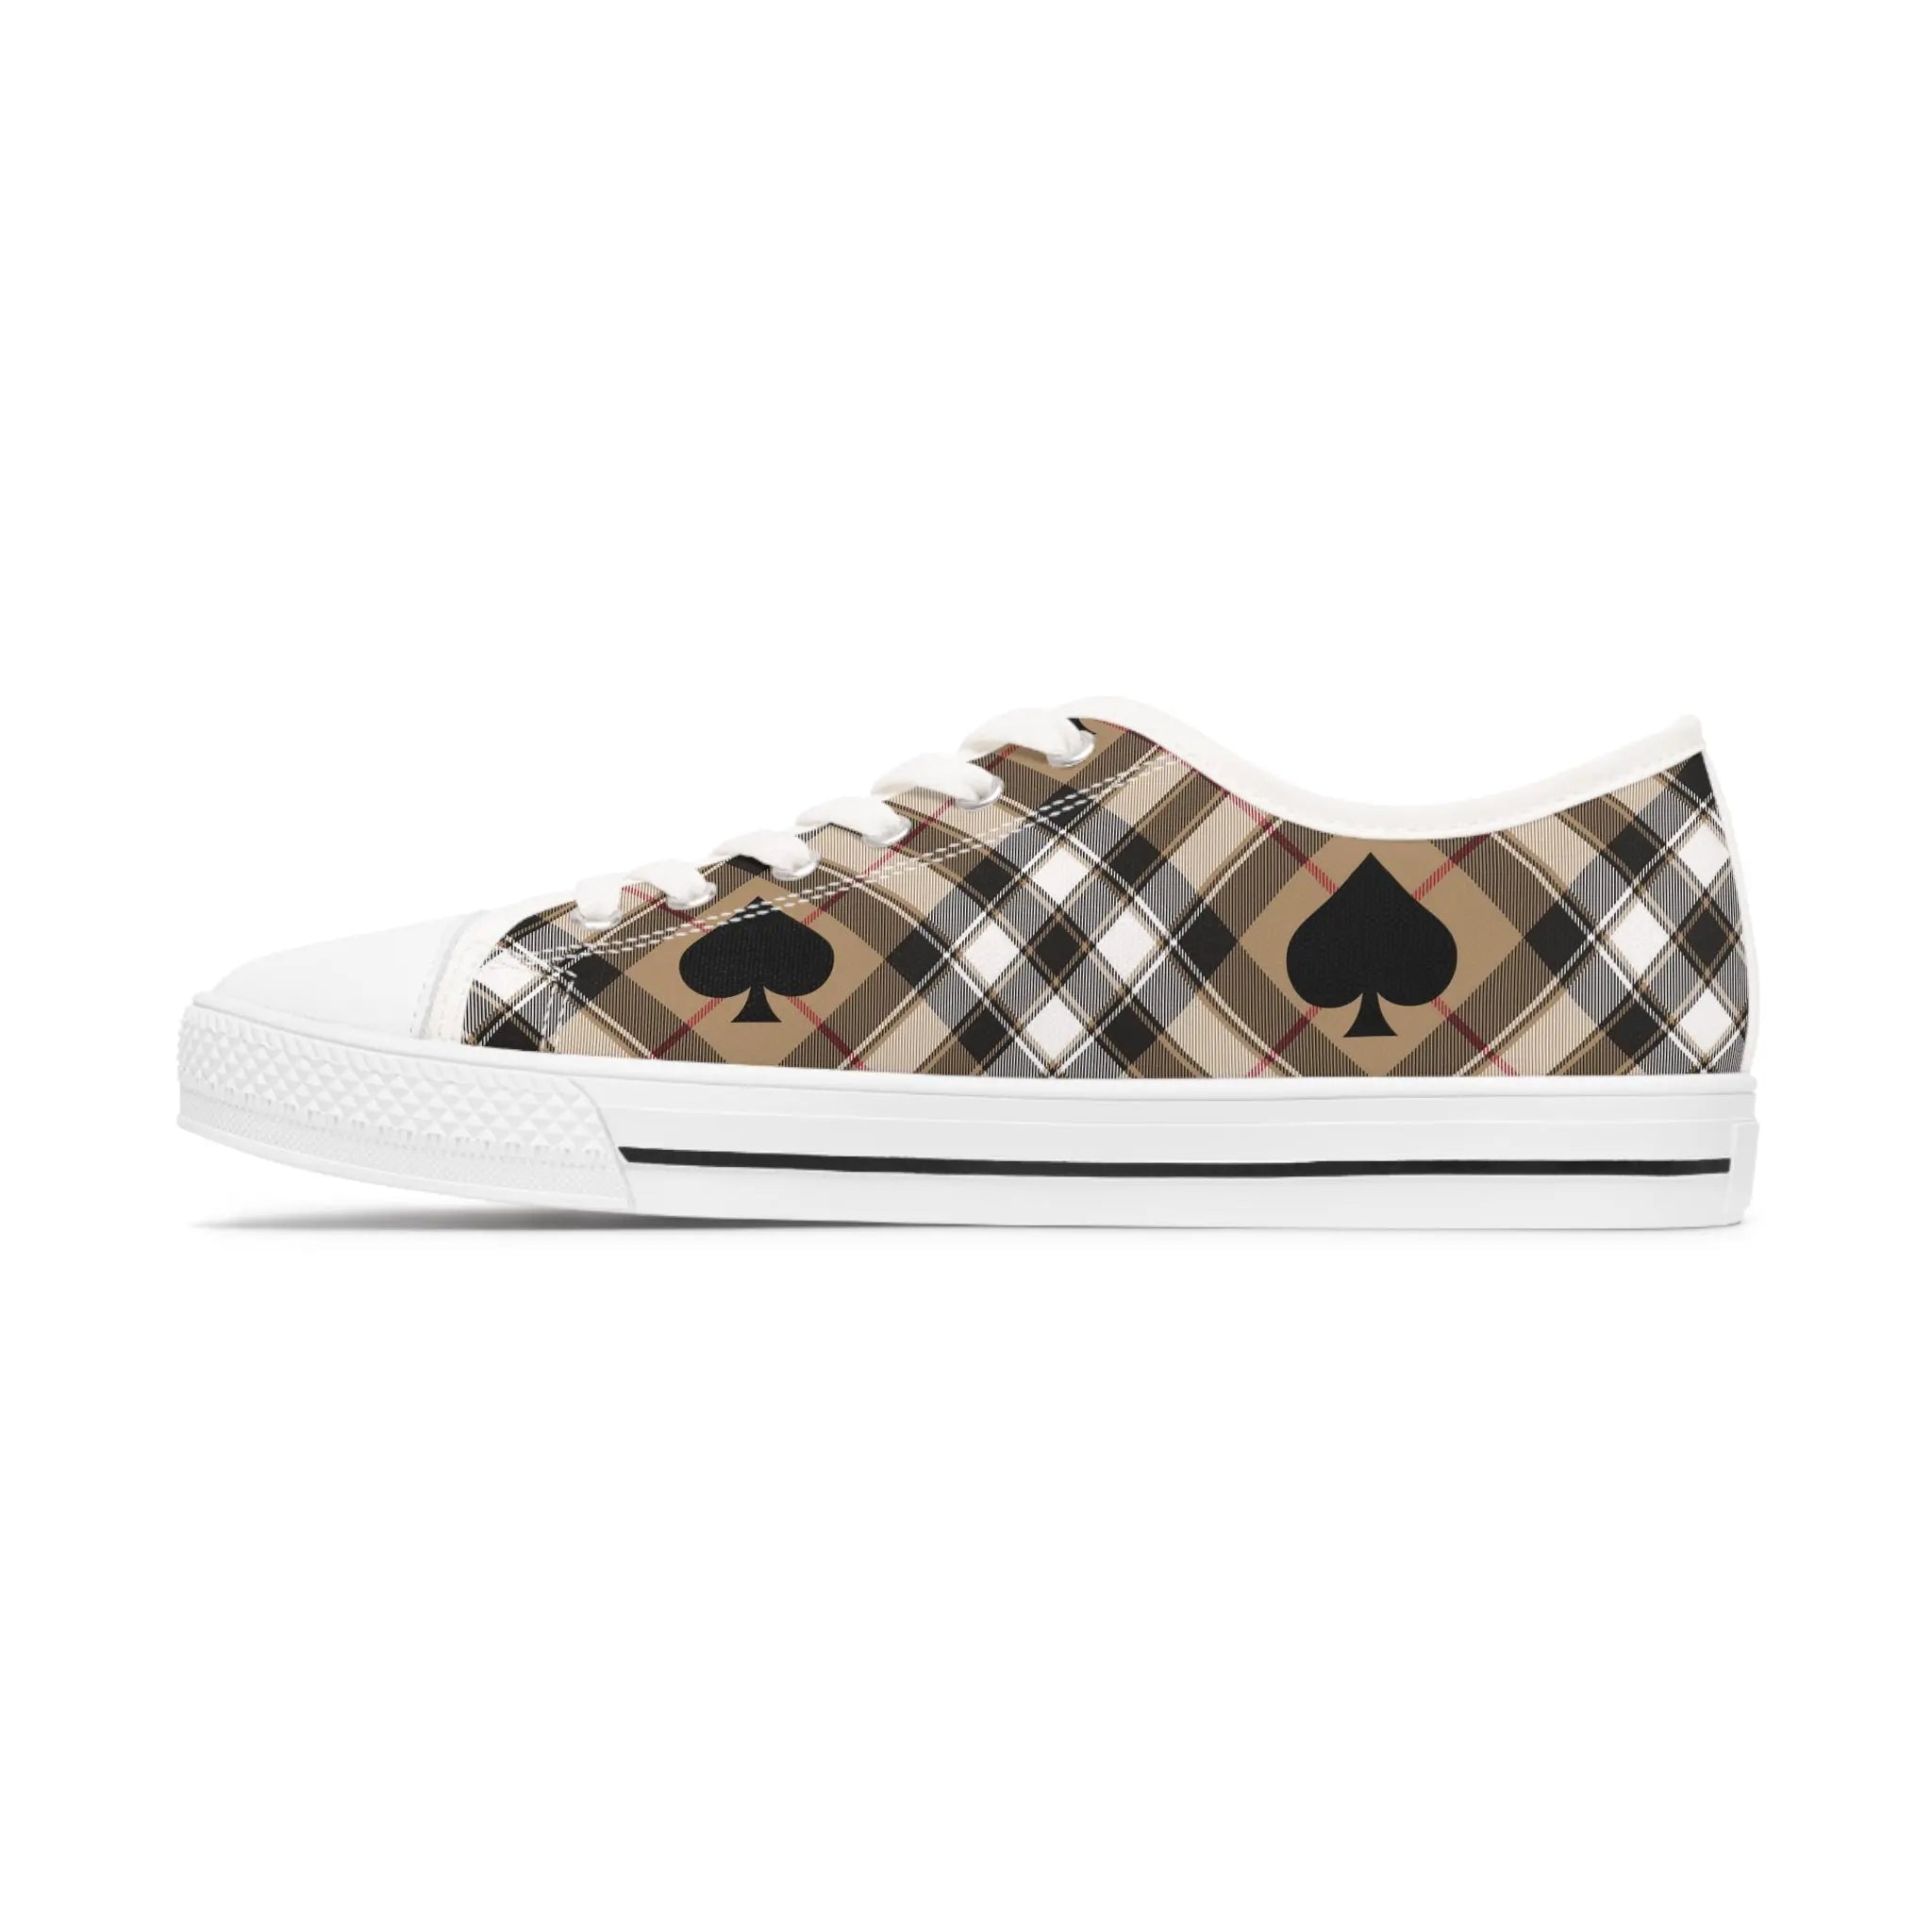  Abby Beige Ace of Spades Women's Low Top White Canvas Shoes, Slip On Canvas Shoes Shoes